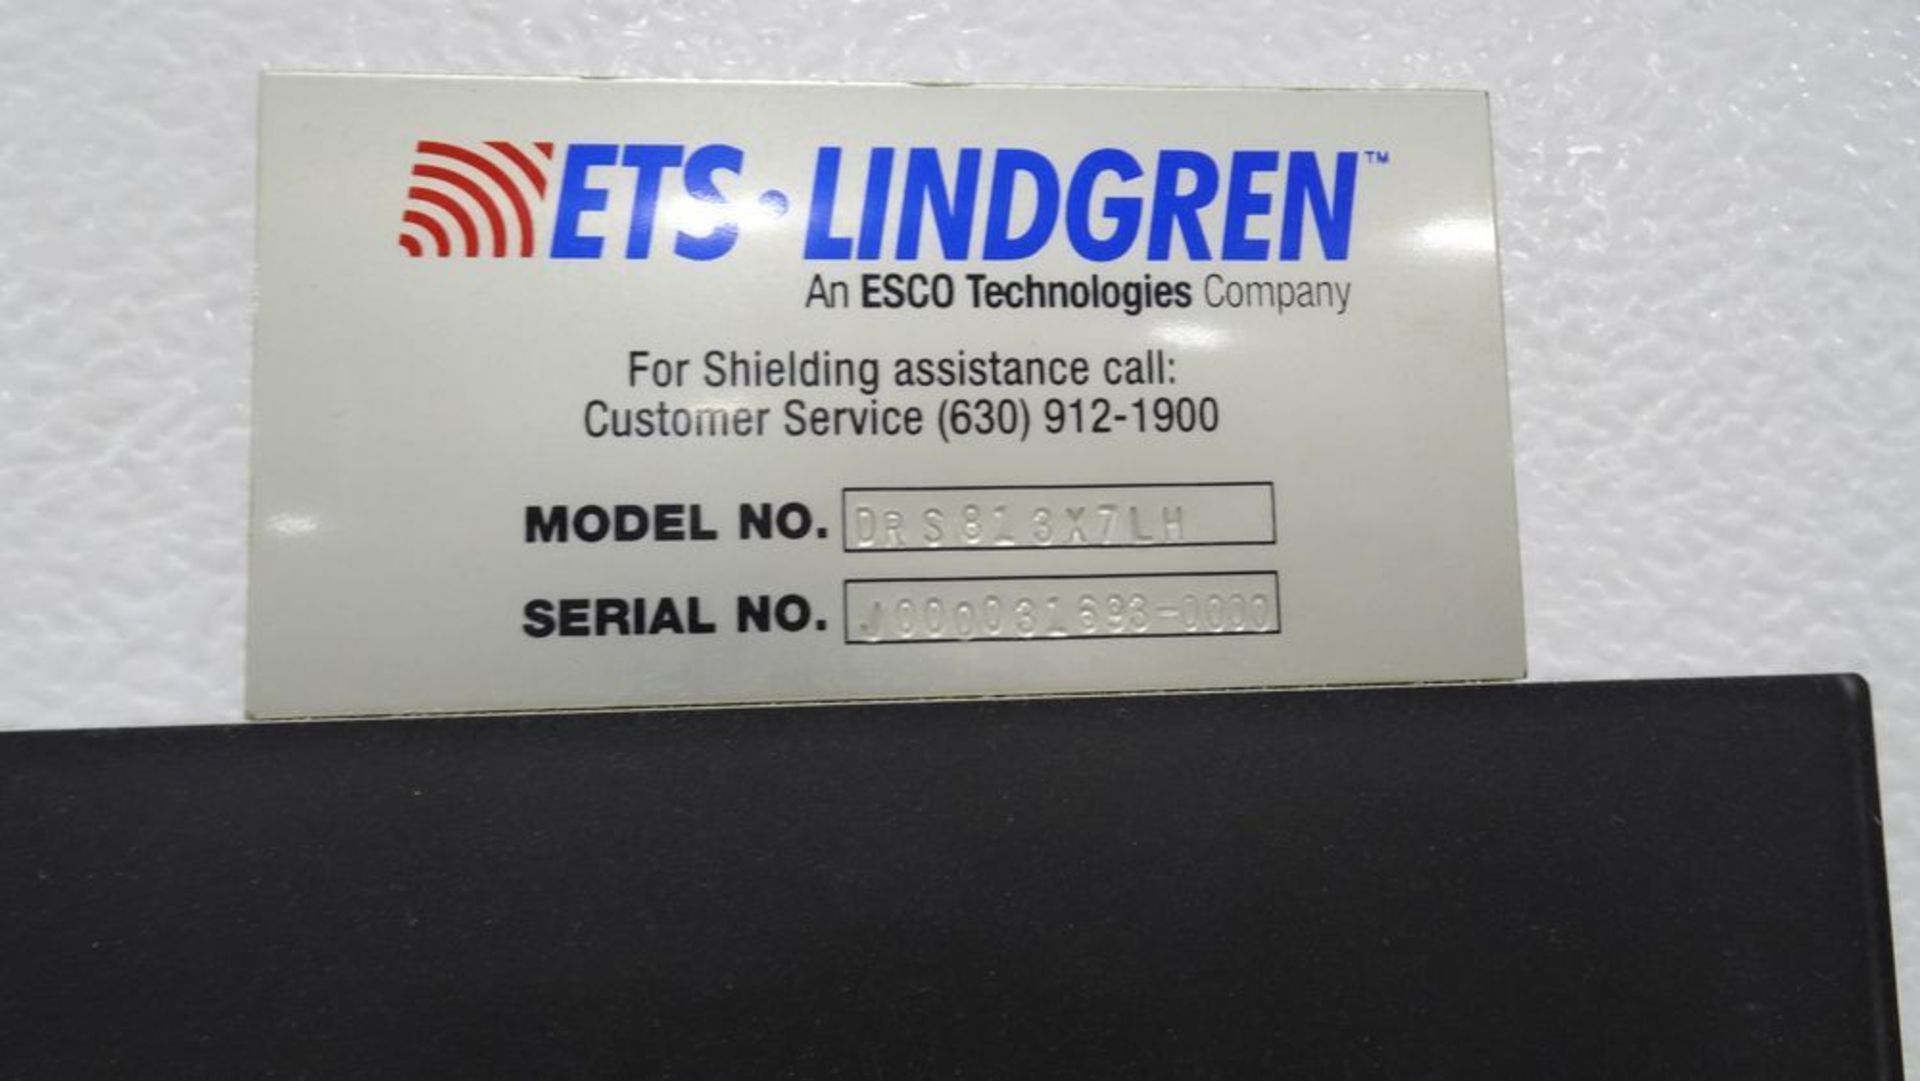 2008 ETS-LINDGREN DRS813X7LH RADIO FREQUENCY SHIELDED ROOM, S/N J000031693-0000, 148"W X 98"L X 98"H - Image 3 of 6